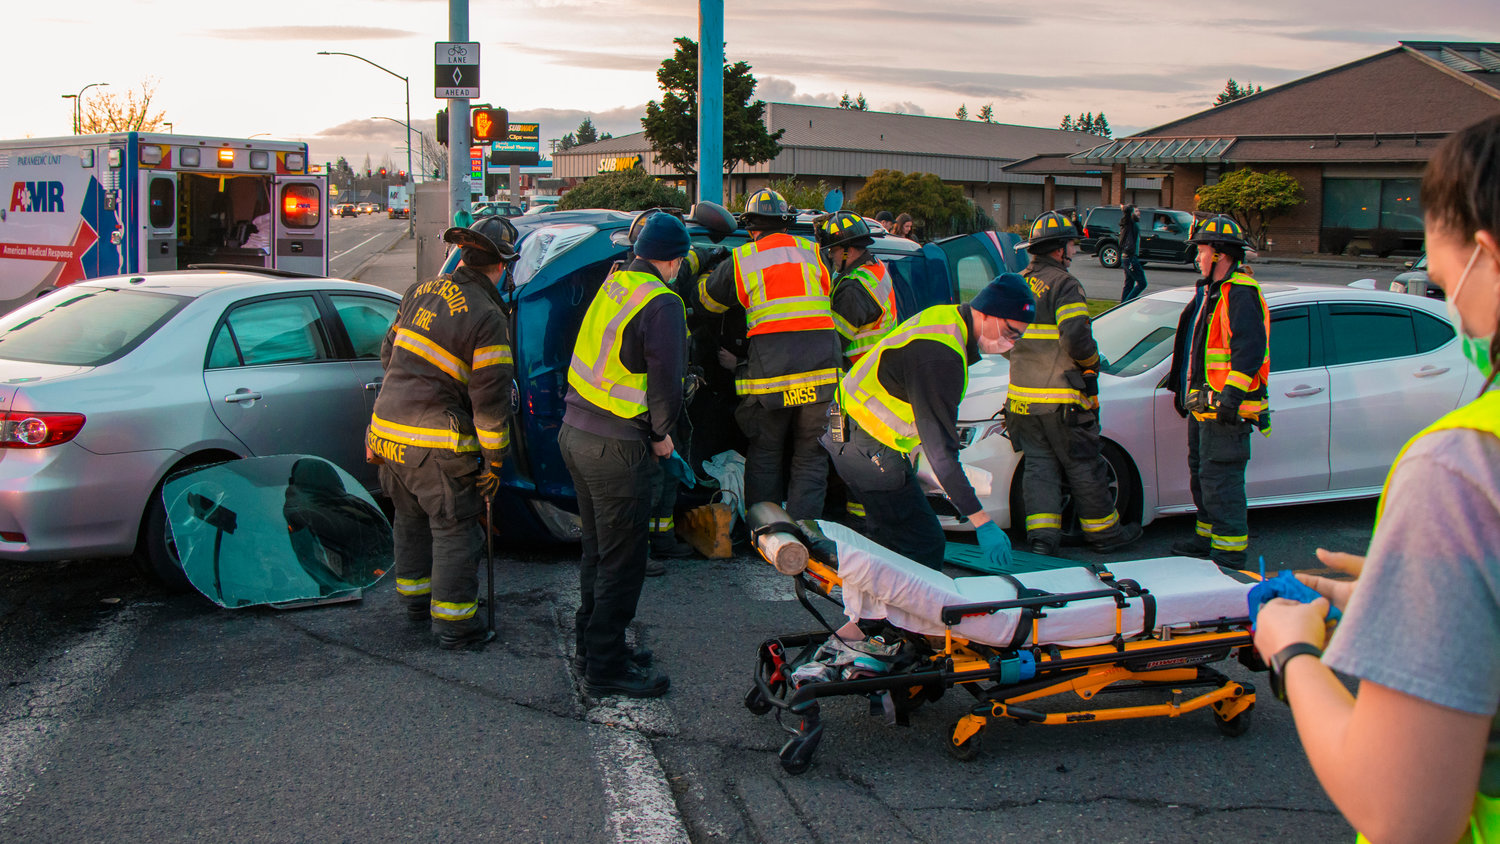 Emergency crews respond to the scene of a multi-vehicle collison in Centralia at the intersection of Harrison and Belmont Avenue on Tuesday.